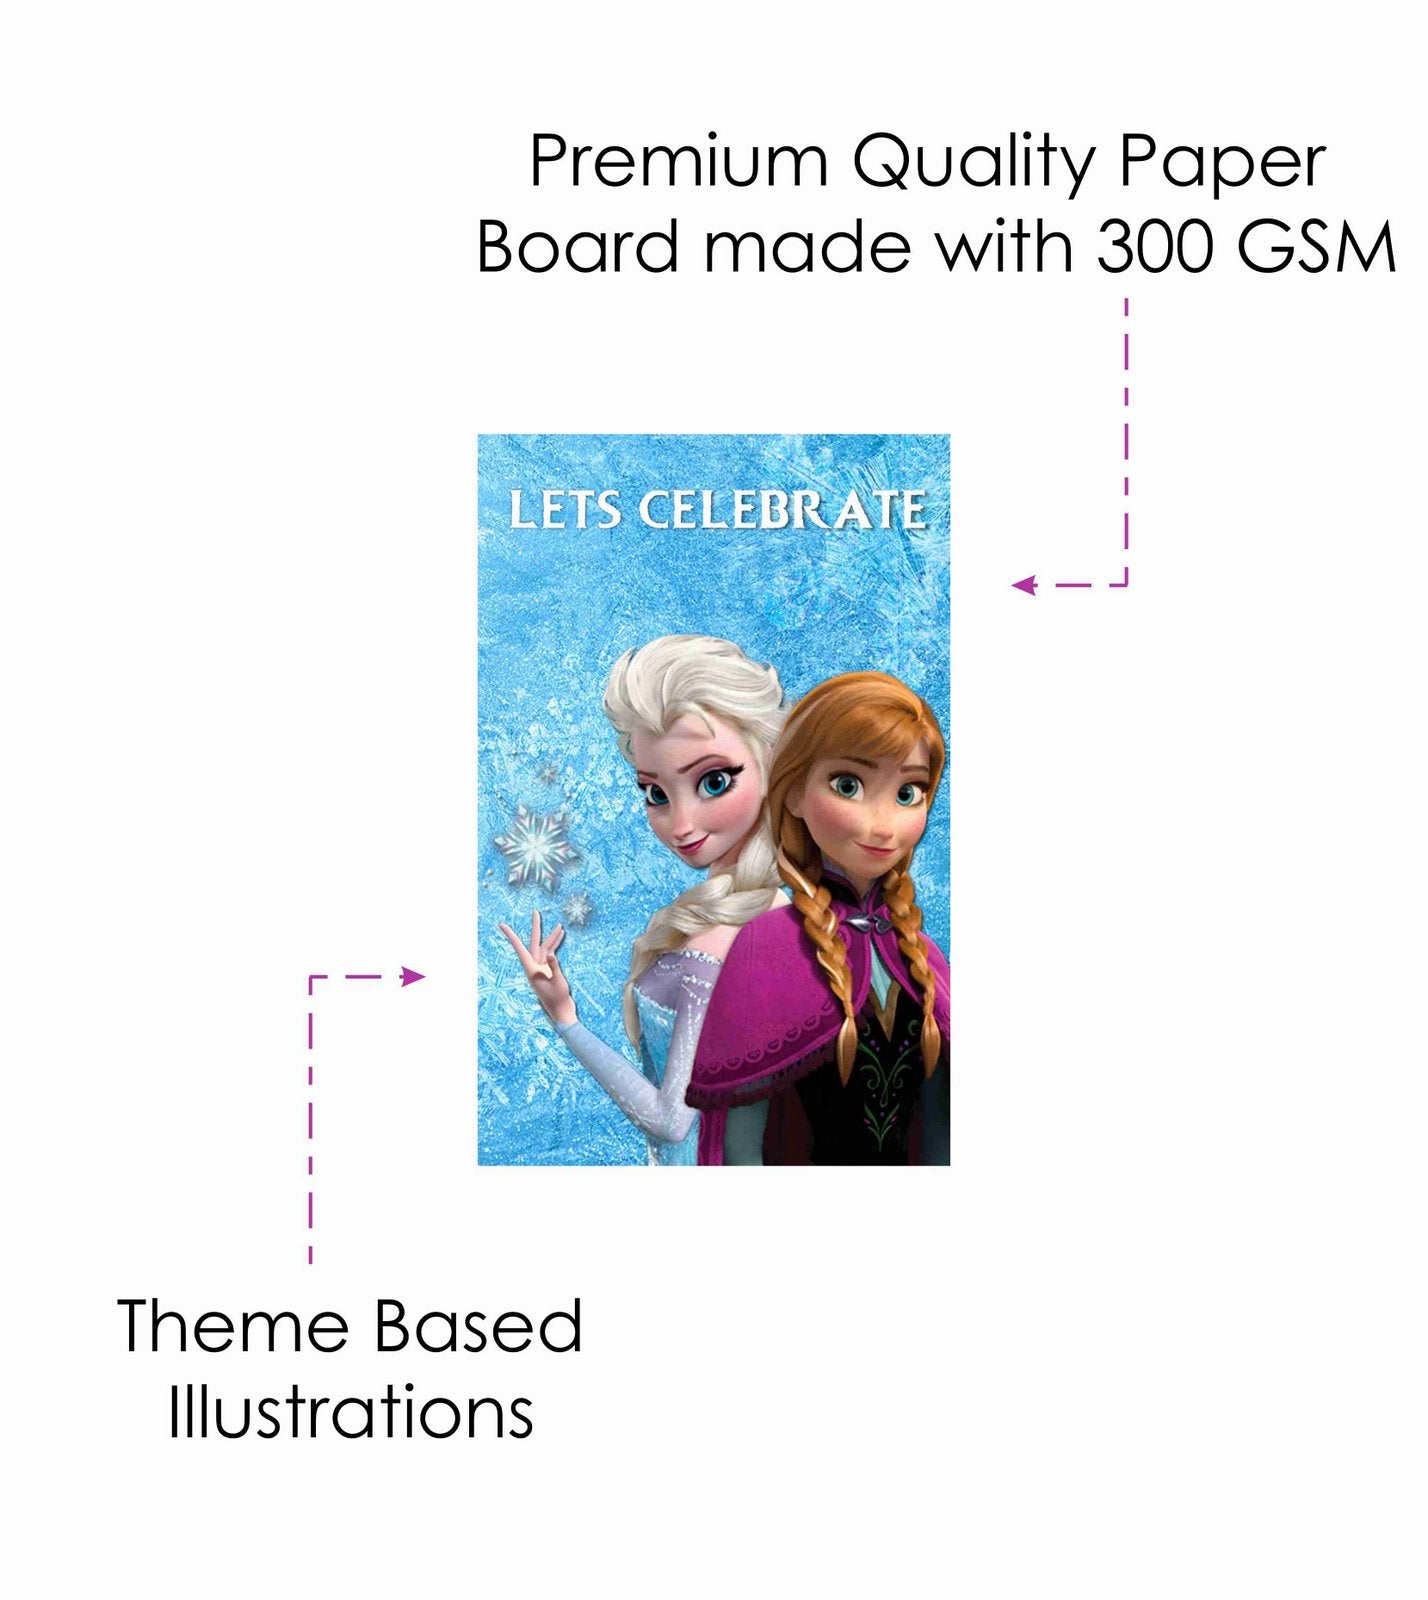 Frozen Theme Children's Birthday Party Invitations Cards with Envelopes - Kids Birthday Party Invitations for Boys or Girls,- Invitation Cards (Pack of 10)